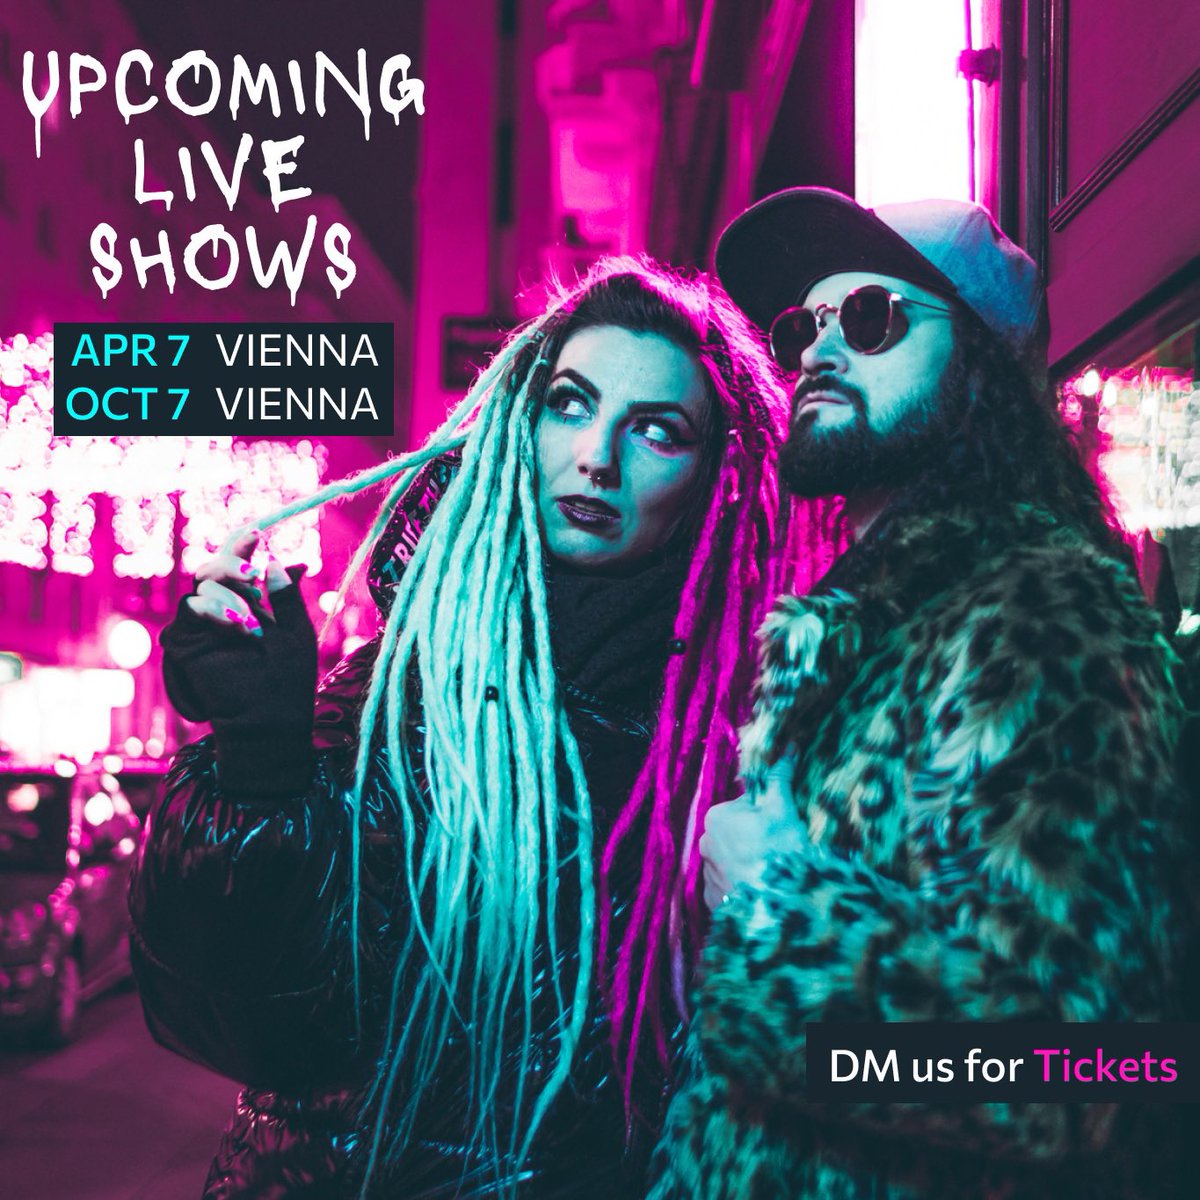 So freaking excited to play live again! 💖🖤 Comment below if you want Tickets! 
#livemusic #rockconcert #vienna